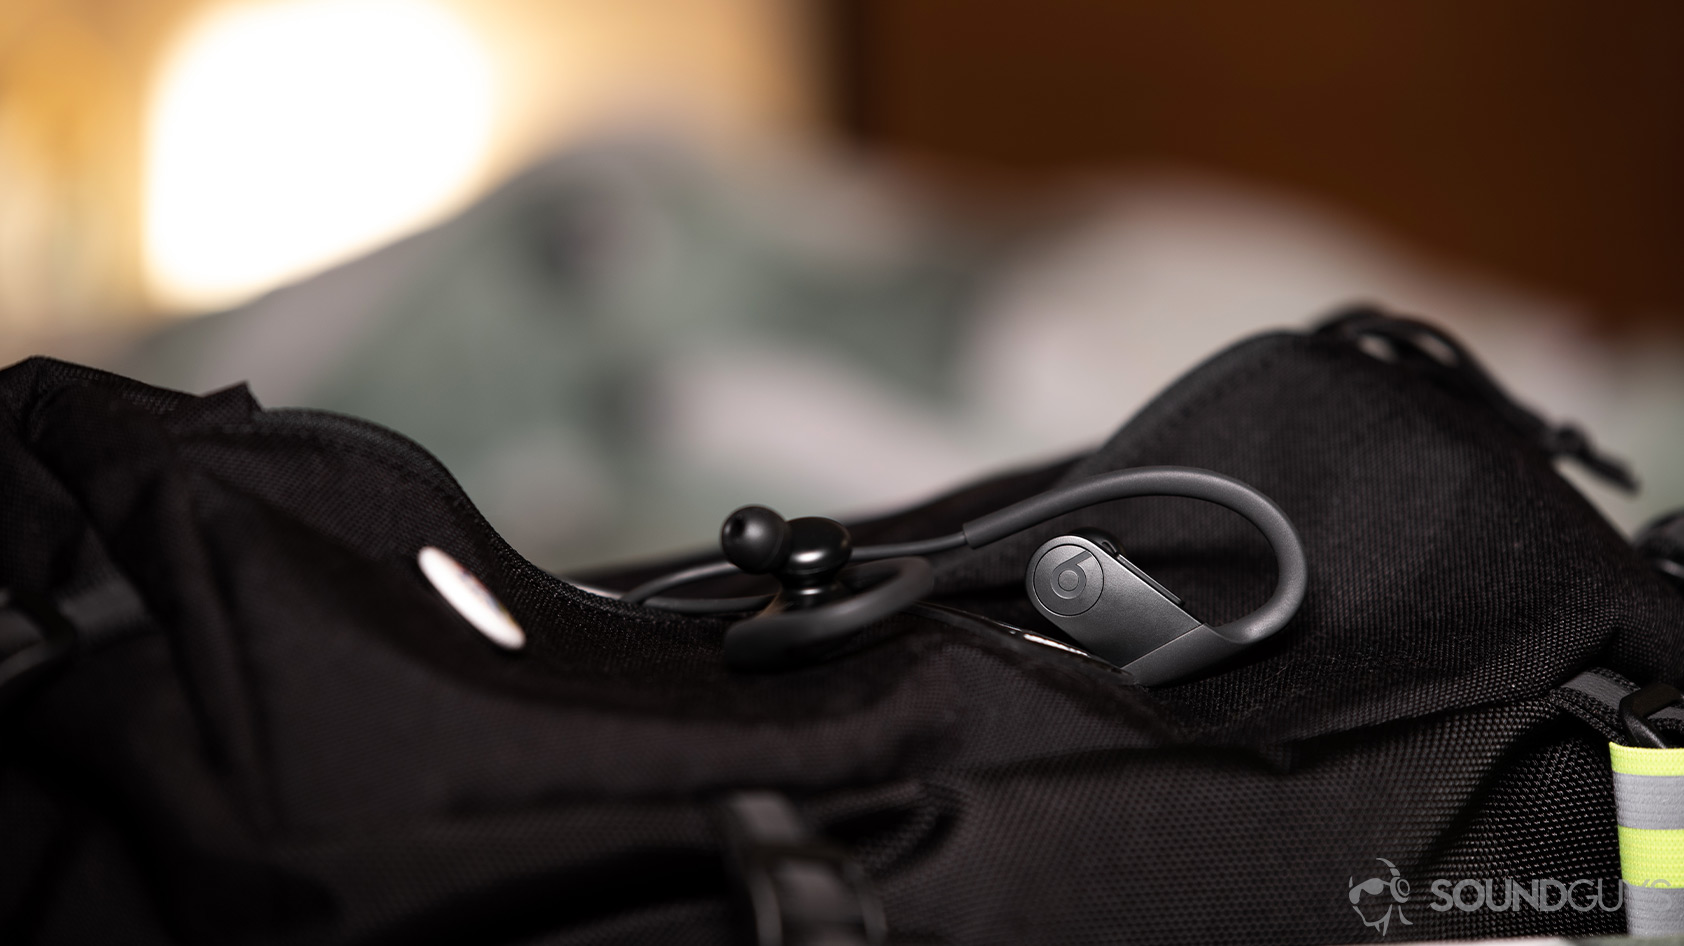 A picture of the Apple Beats Powerbeats workout earbuds on top of a nylon sling bag.